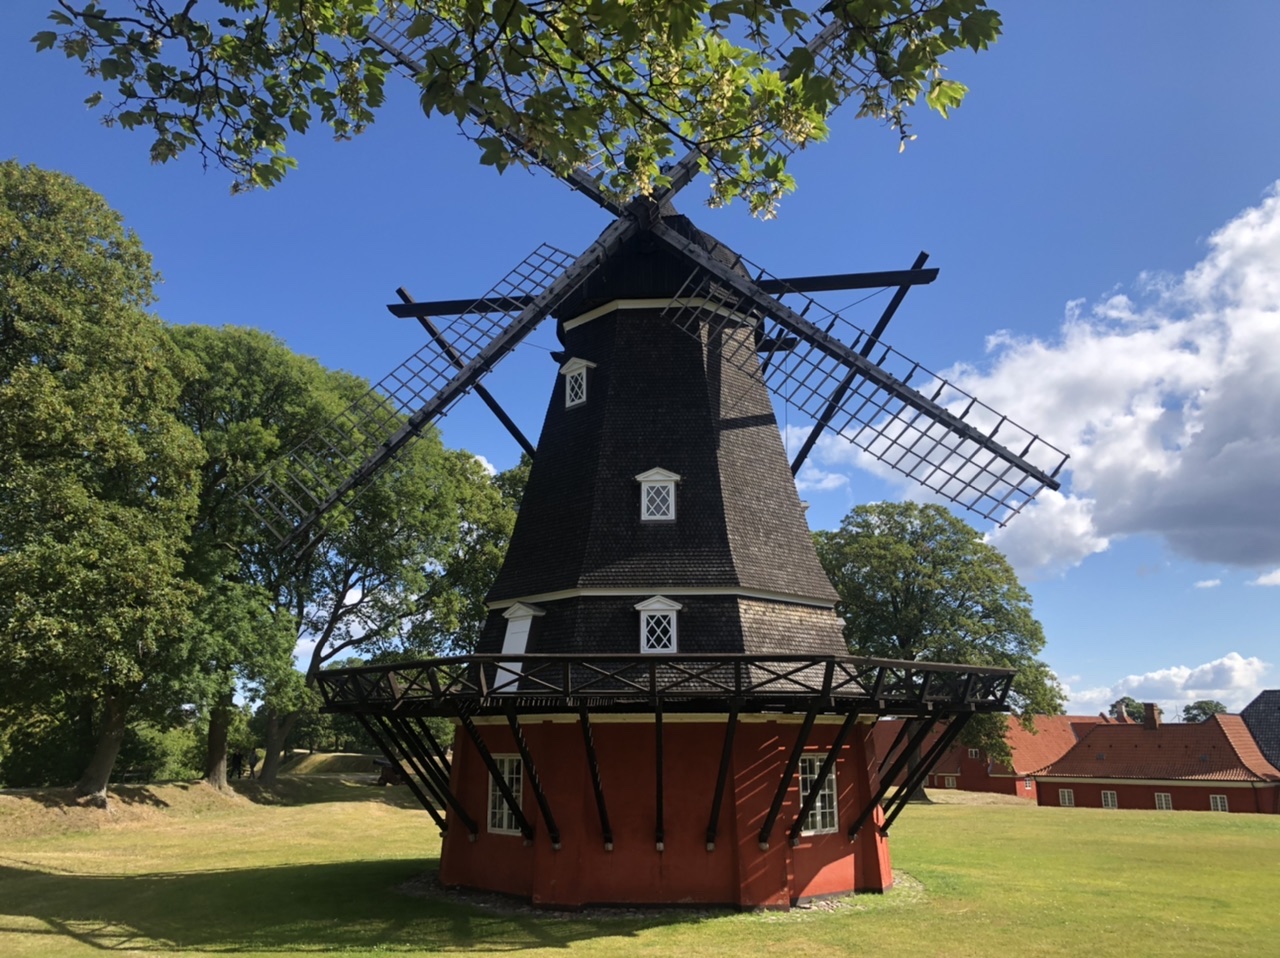 traditional wooden windmill on green grass surrounded by green trees